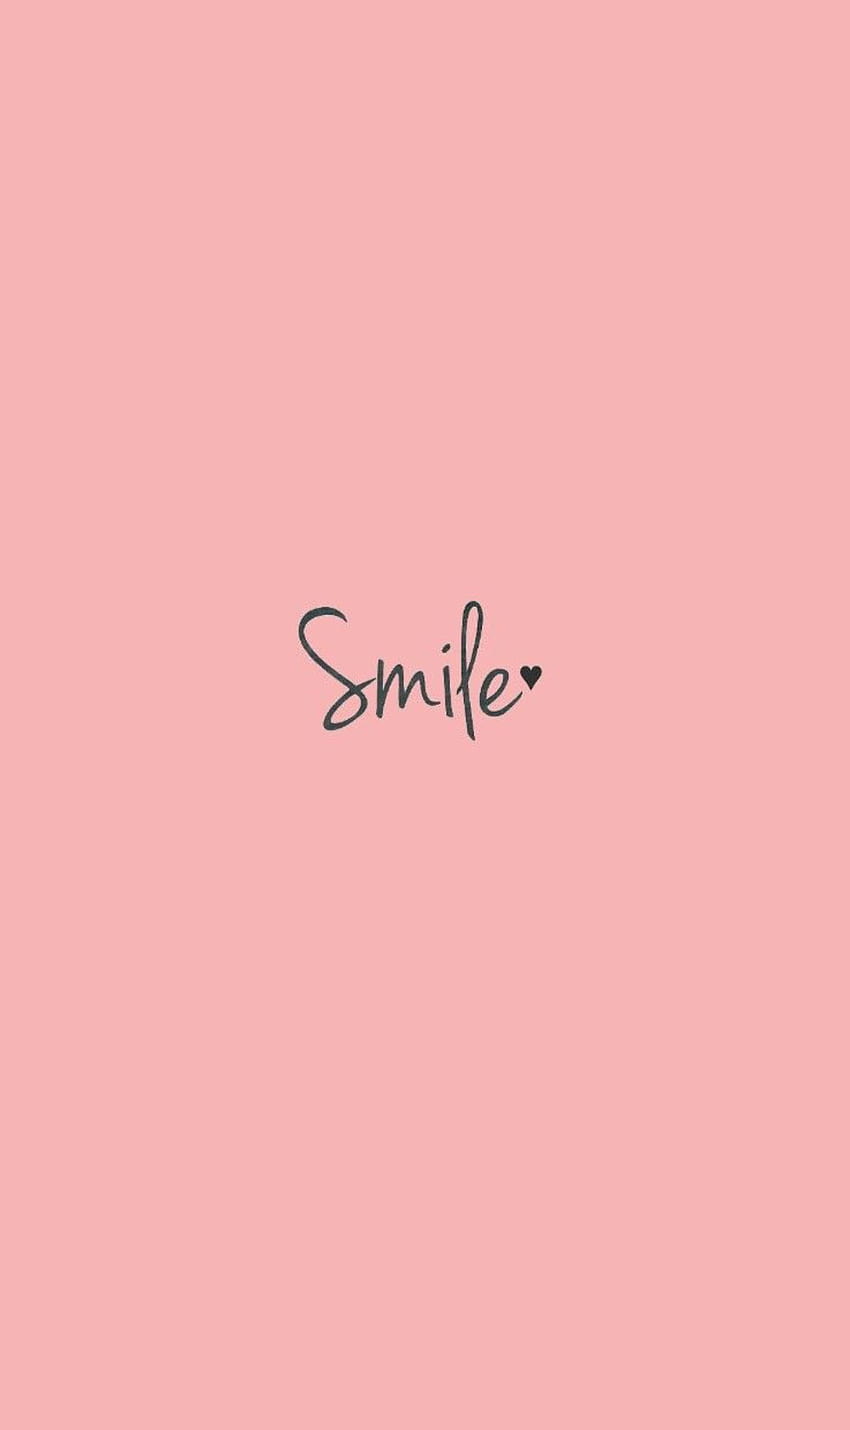 The word smile is written on a pink background - Positivity